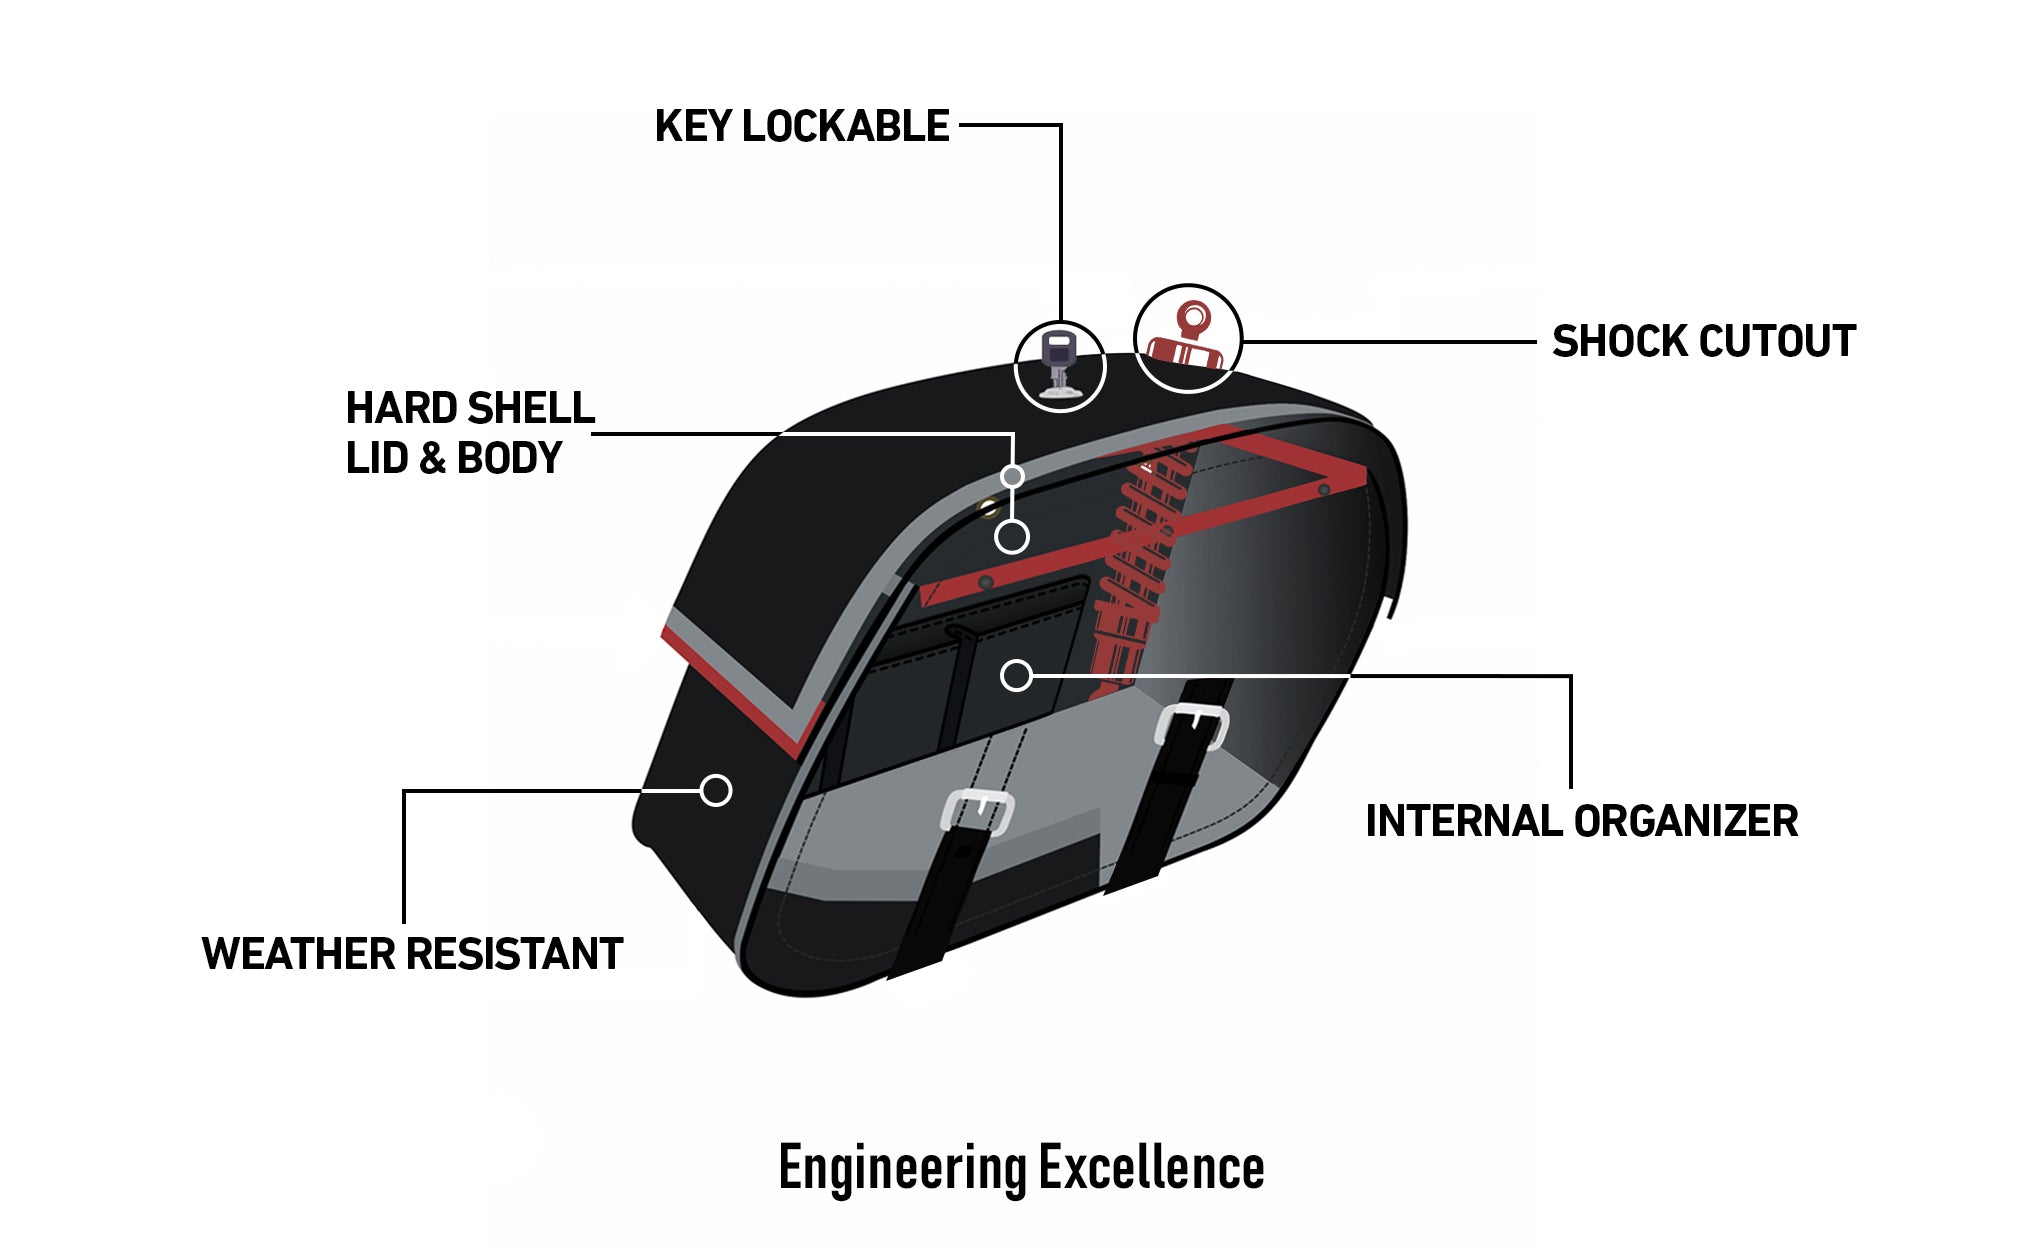 Viking Raven Extra Large Shock Cut Out Leather Motorcycle Saddlebags For Harley Dyna Fat Bob Fxdf Se Engineering Excellence with Bag on Bike @expand